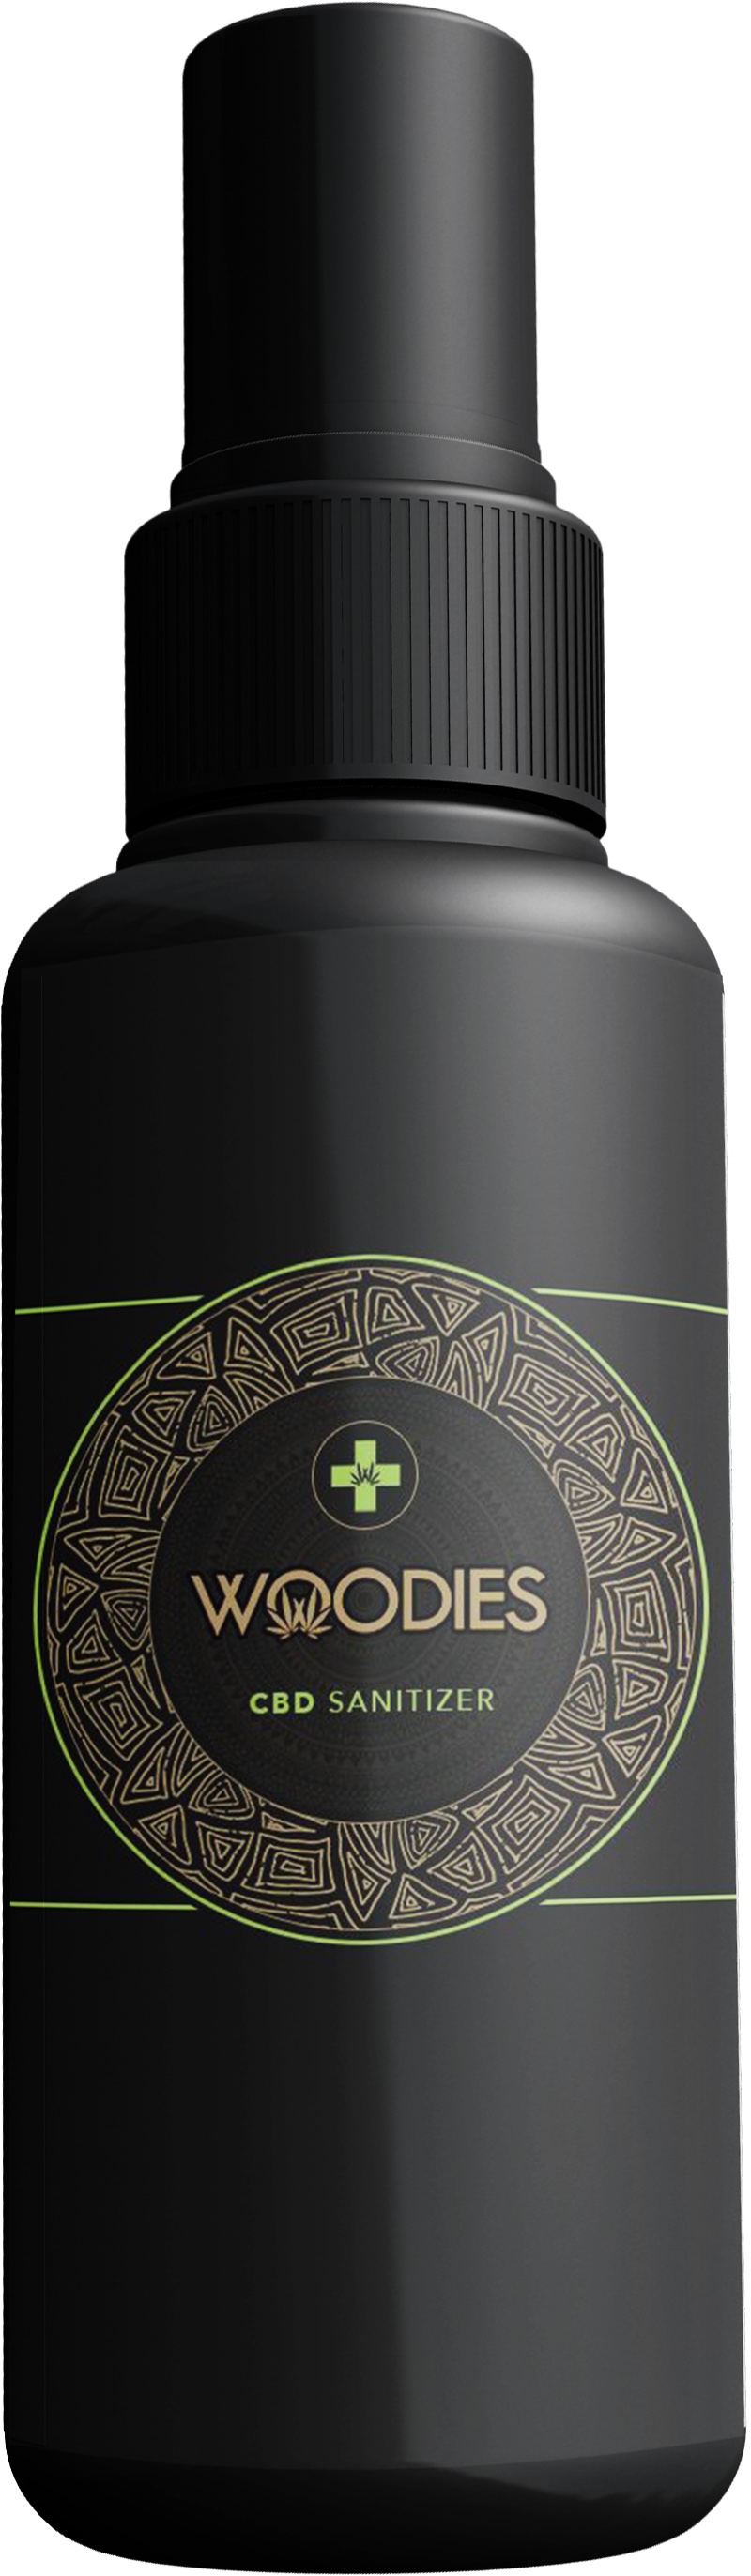 Son of Rolling Stone legend launches CBD brand Woodies 